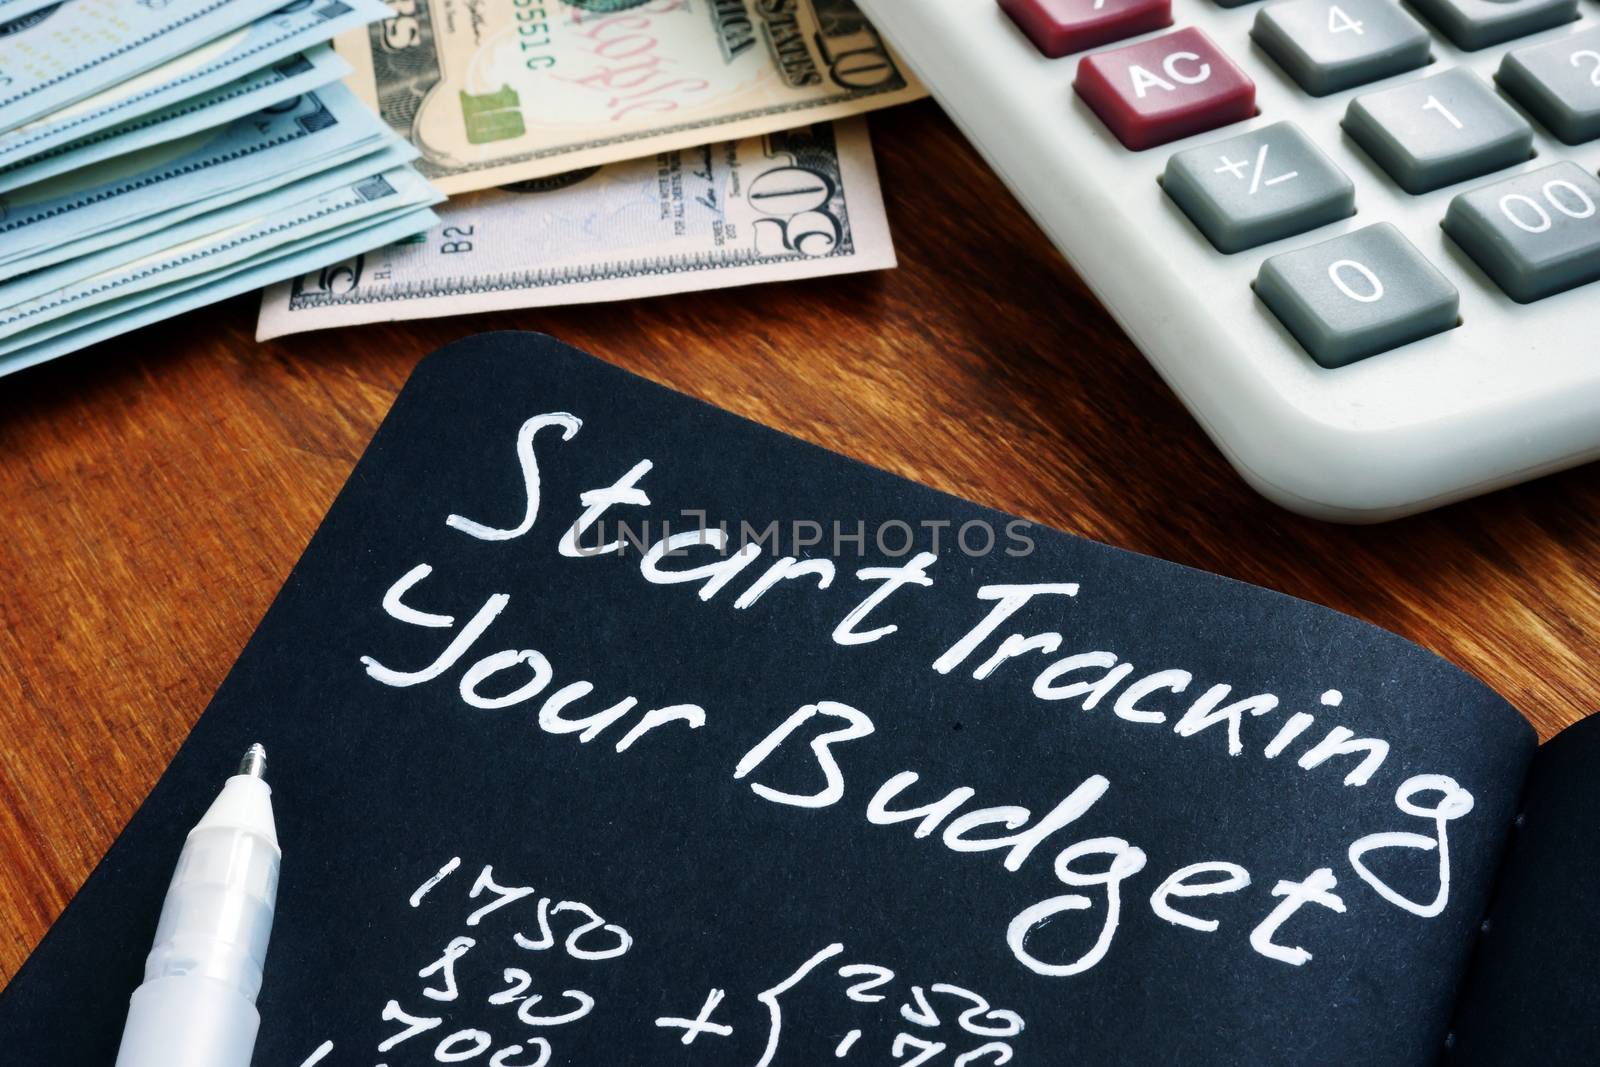 Start tracking your budget sign with home finances calculations. by designer491